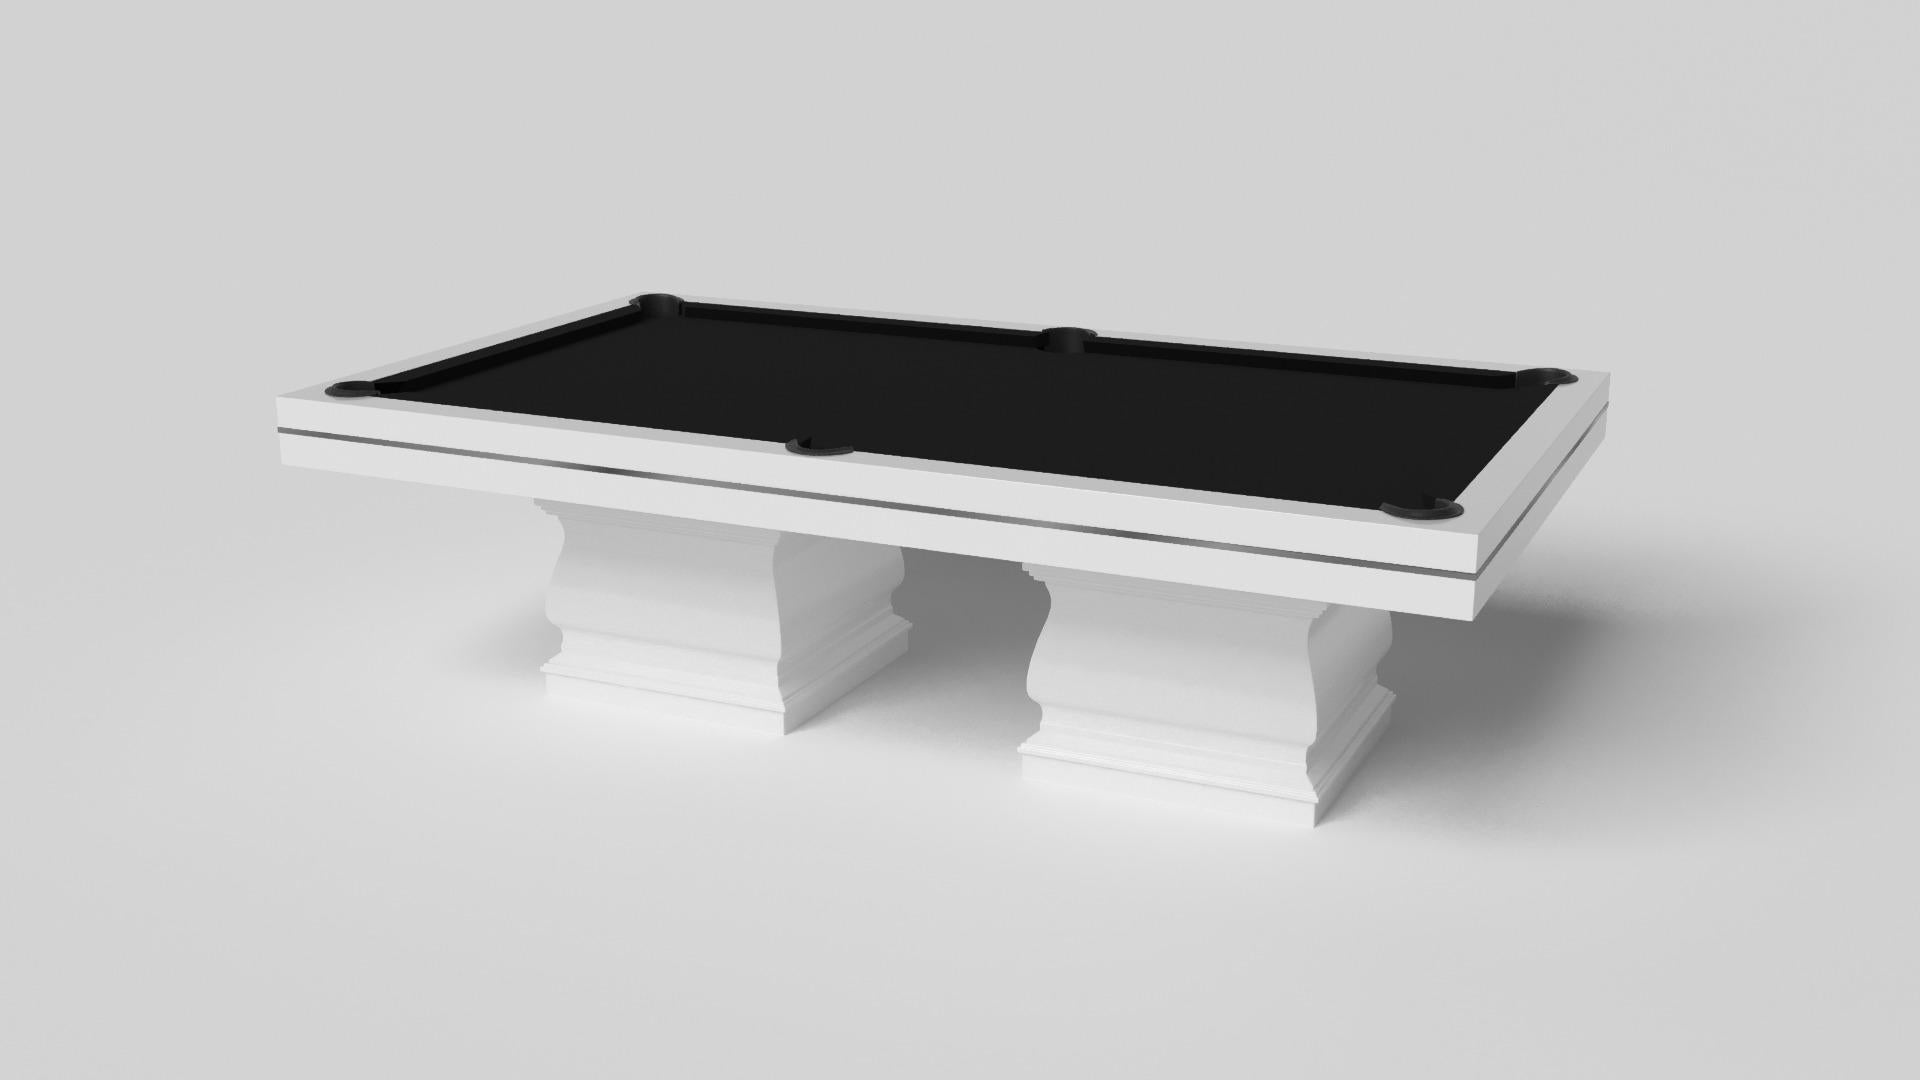 Two hand-sculpted legs bestow a sense of classic style upon this handcrafted pool table in white. This luxury wood game table features a smooth rectangular top perched upon two wide baluster column legs that mimic the curves and lines of crown